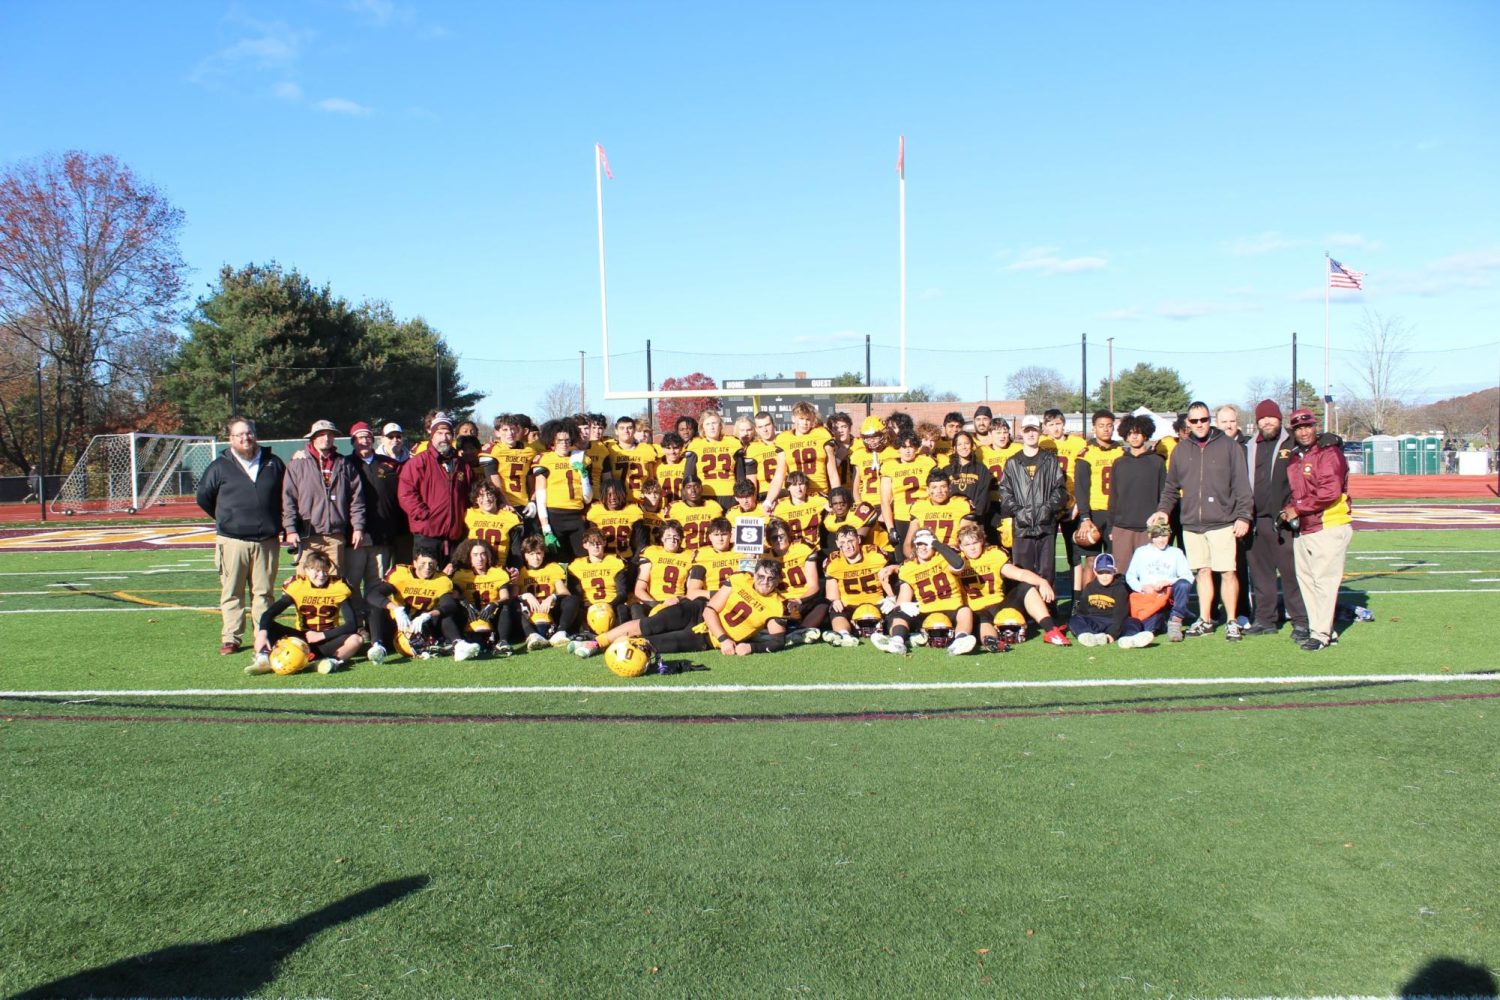 The South Windsor High School football team poses with the route five rivalry trophy following the win vs. Enfield.